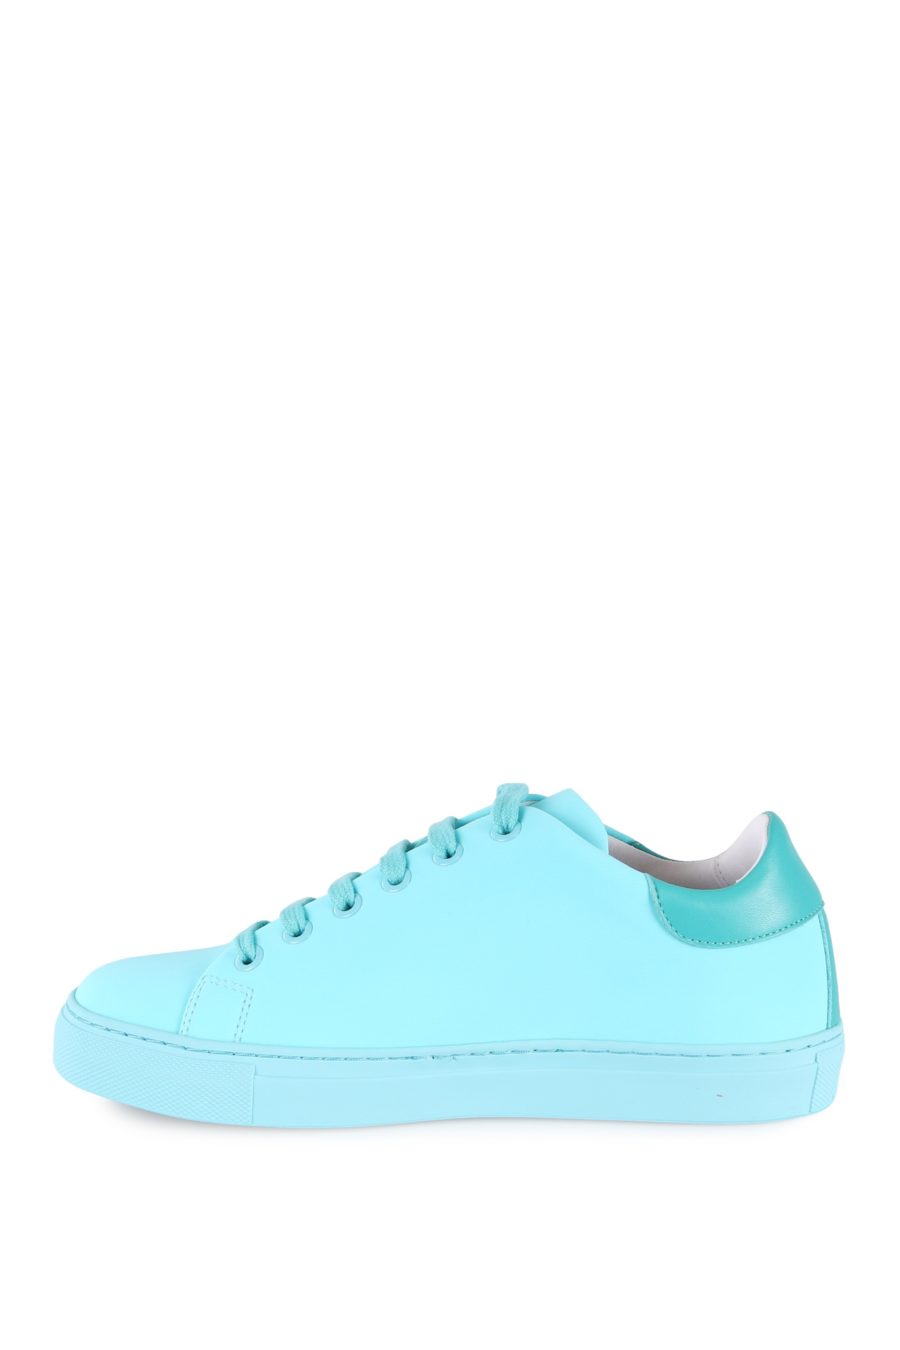 Trainers Moschino Couture in turquoise - f066319cb9e6e6f35793434a3fc525d3224403677f53